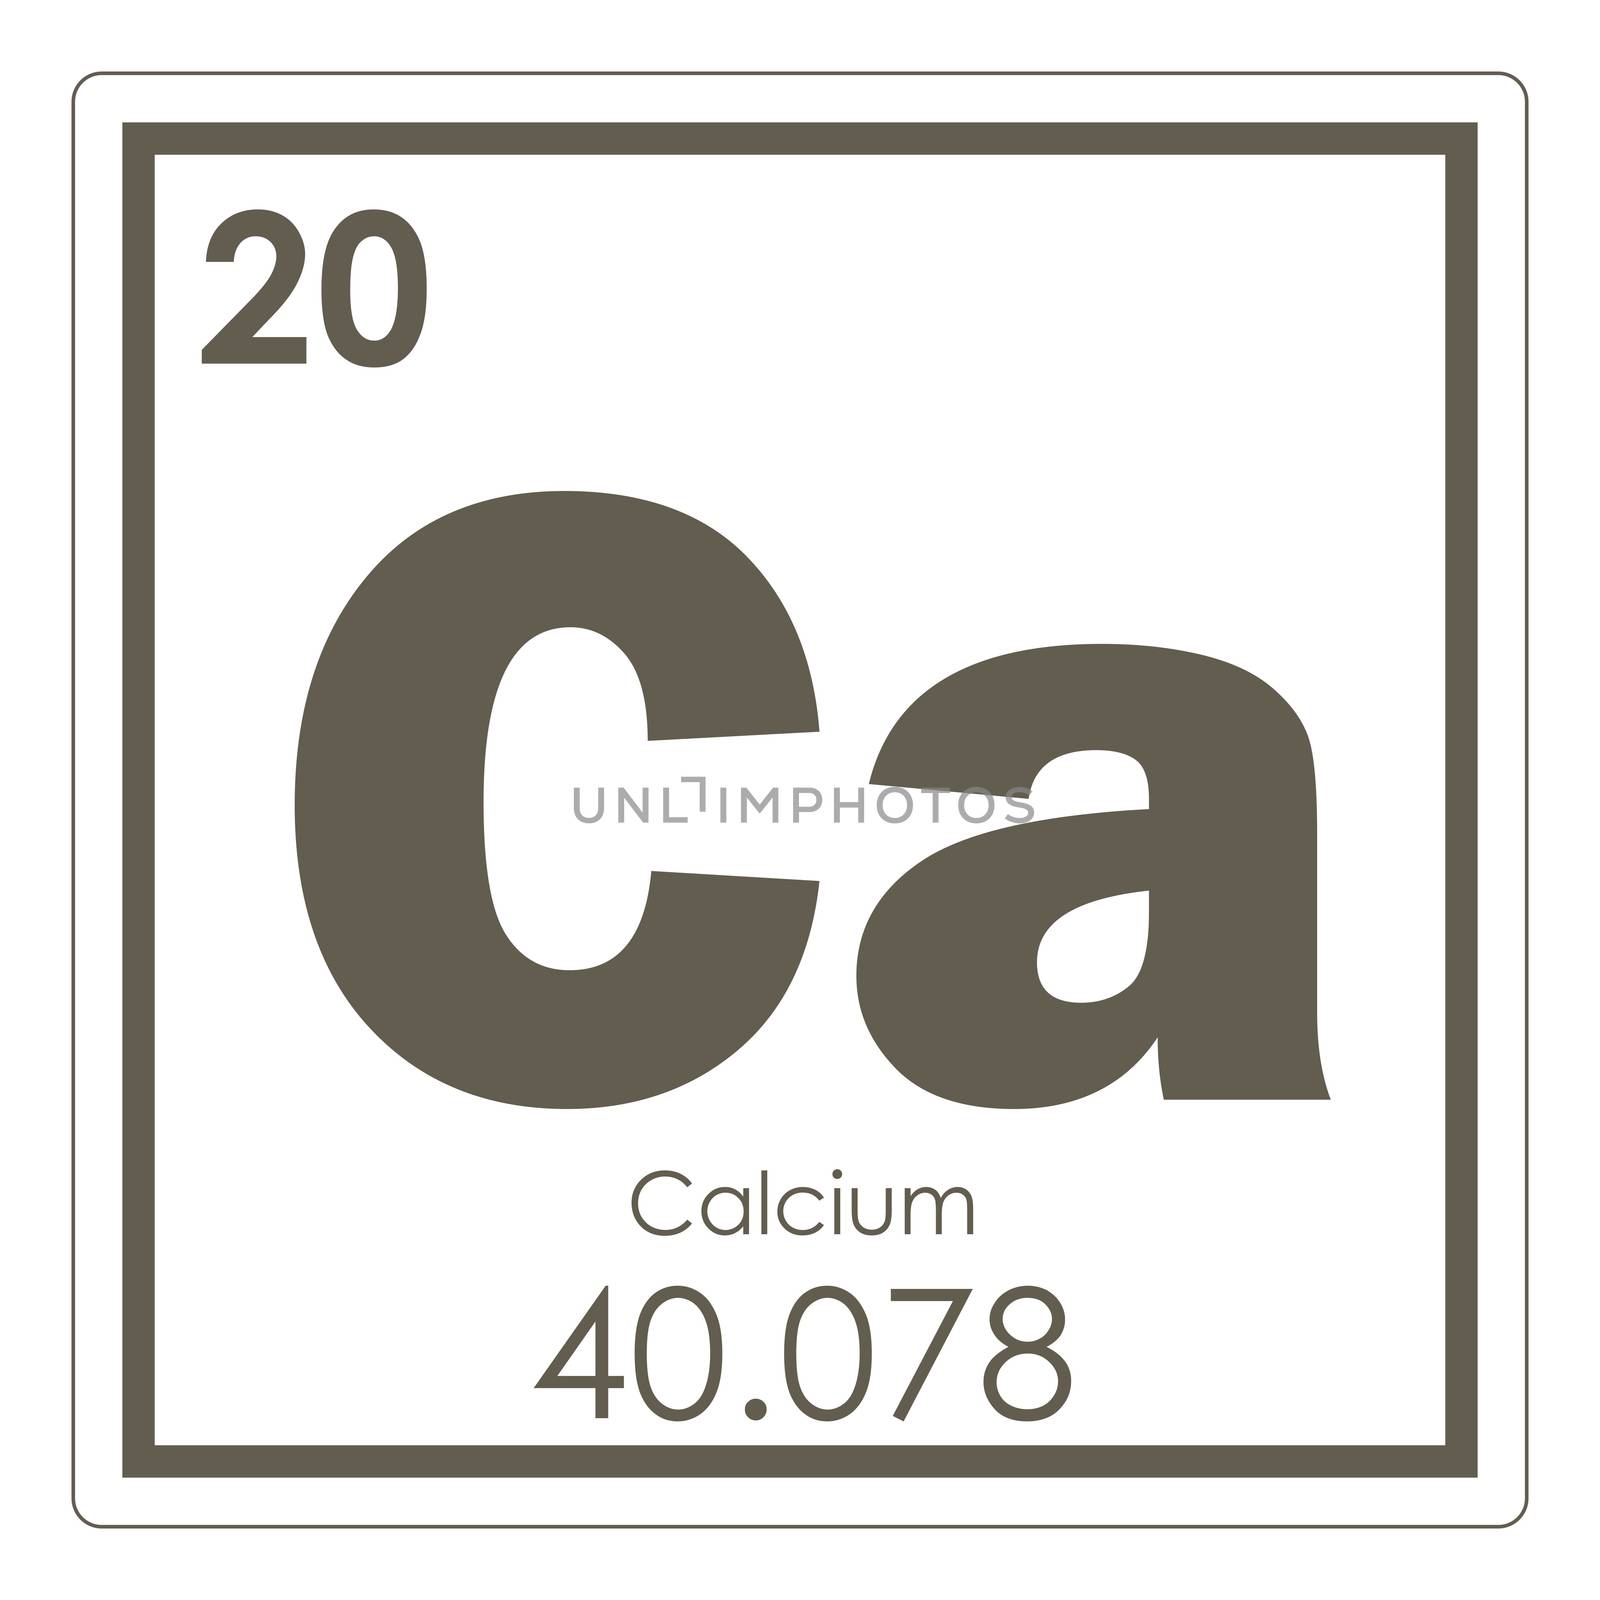 Calcium chemical element by tony4urban